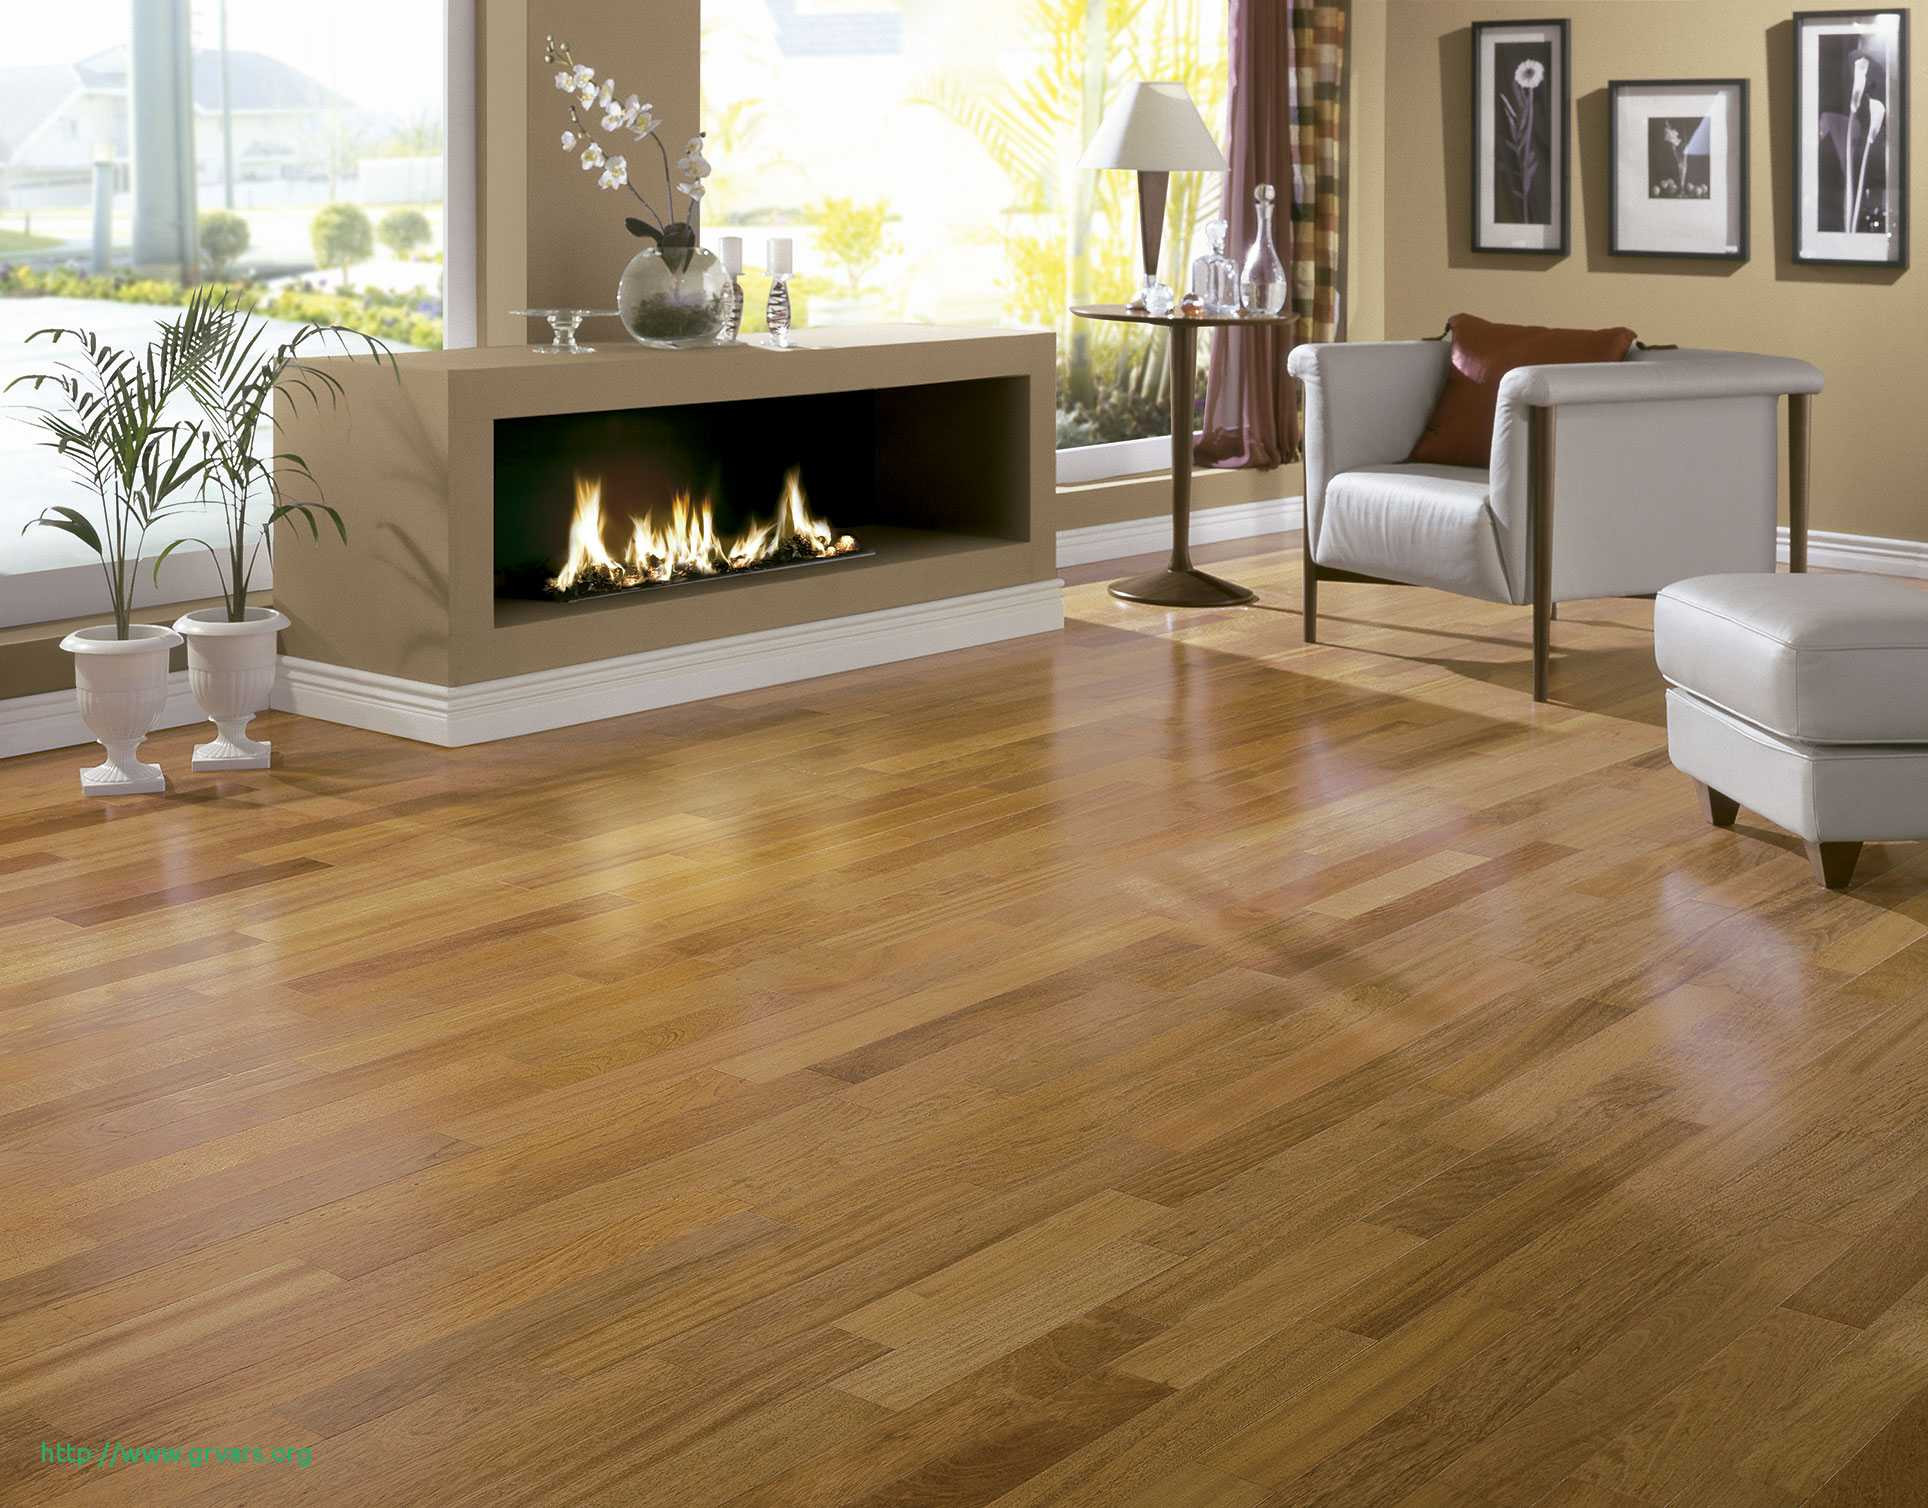 Lowes Fireplace Awesome 13 Lovely Laminate and Hardwood Flooring Difference